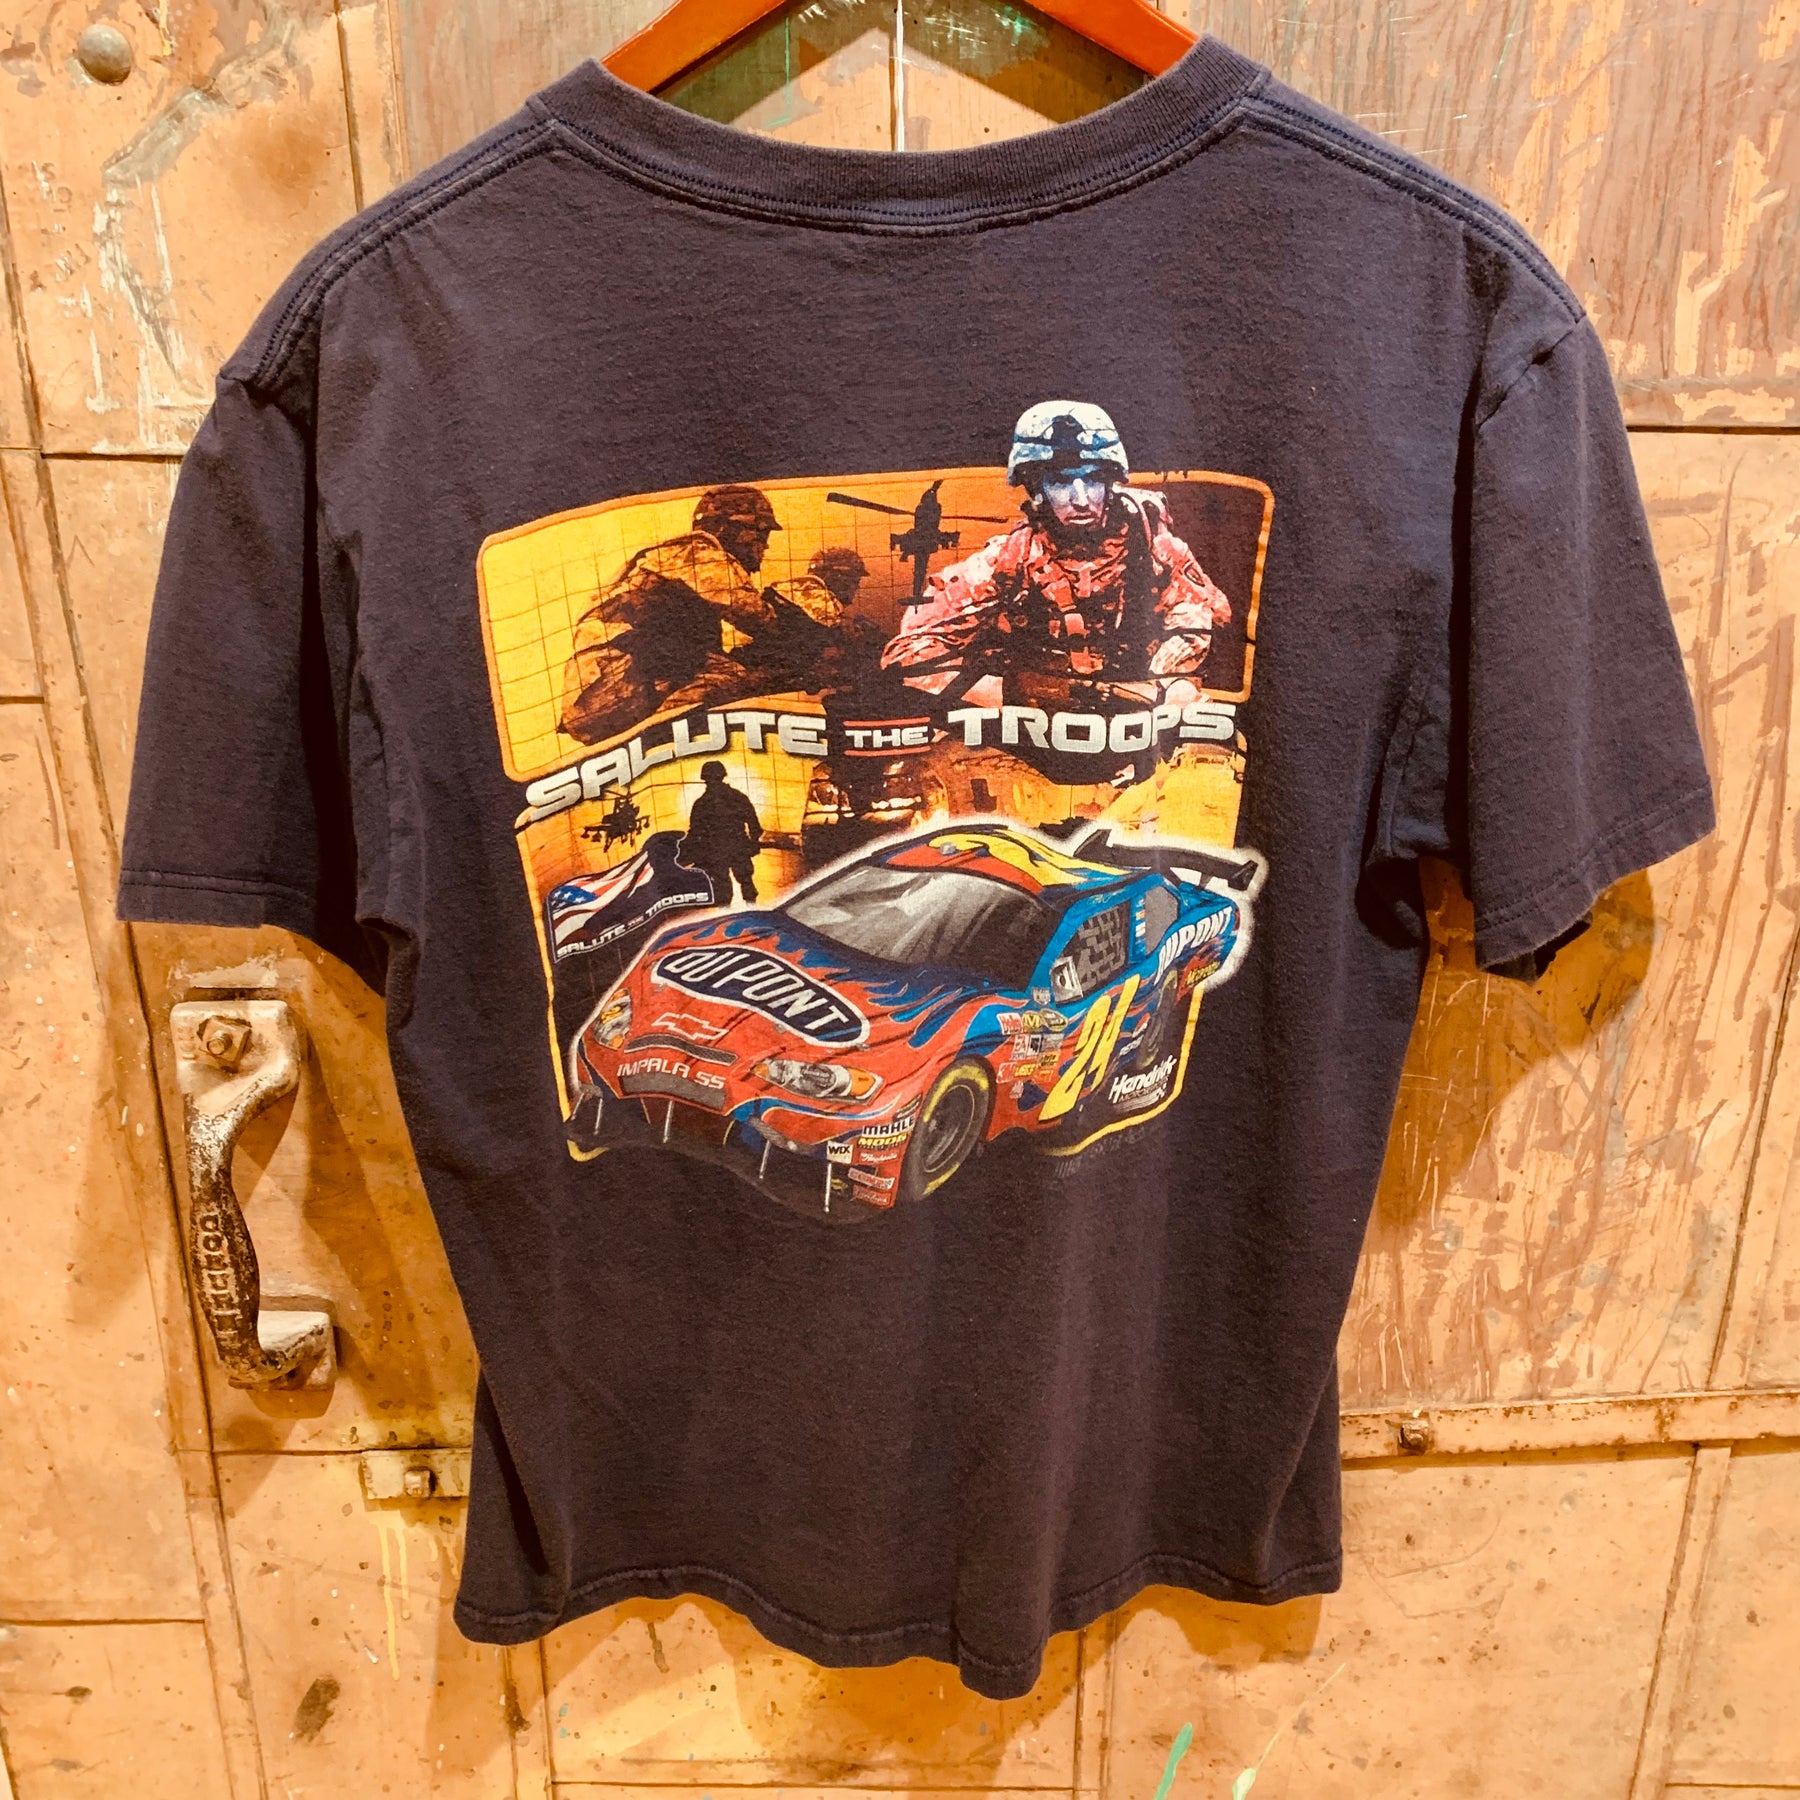 Support the Troops Racer Tee